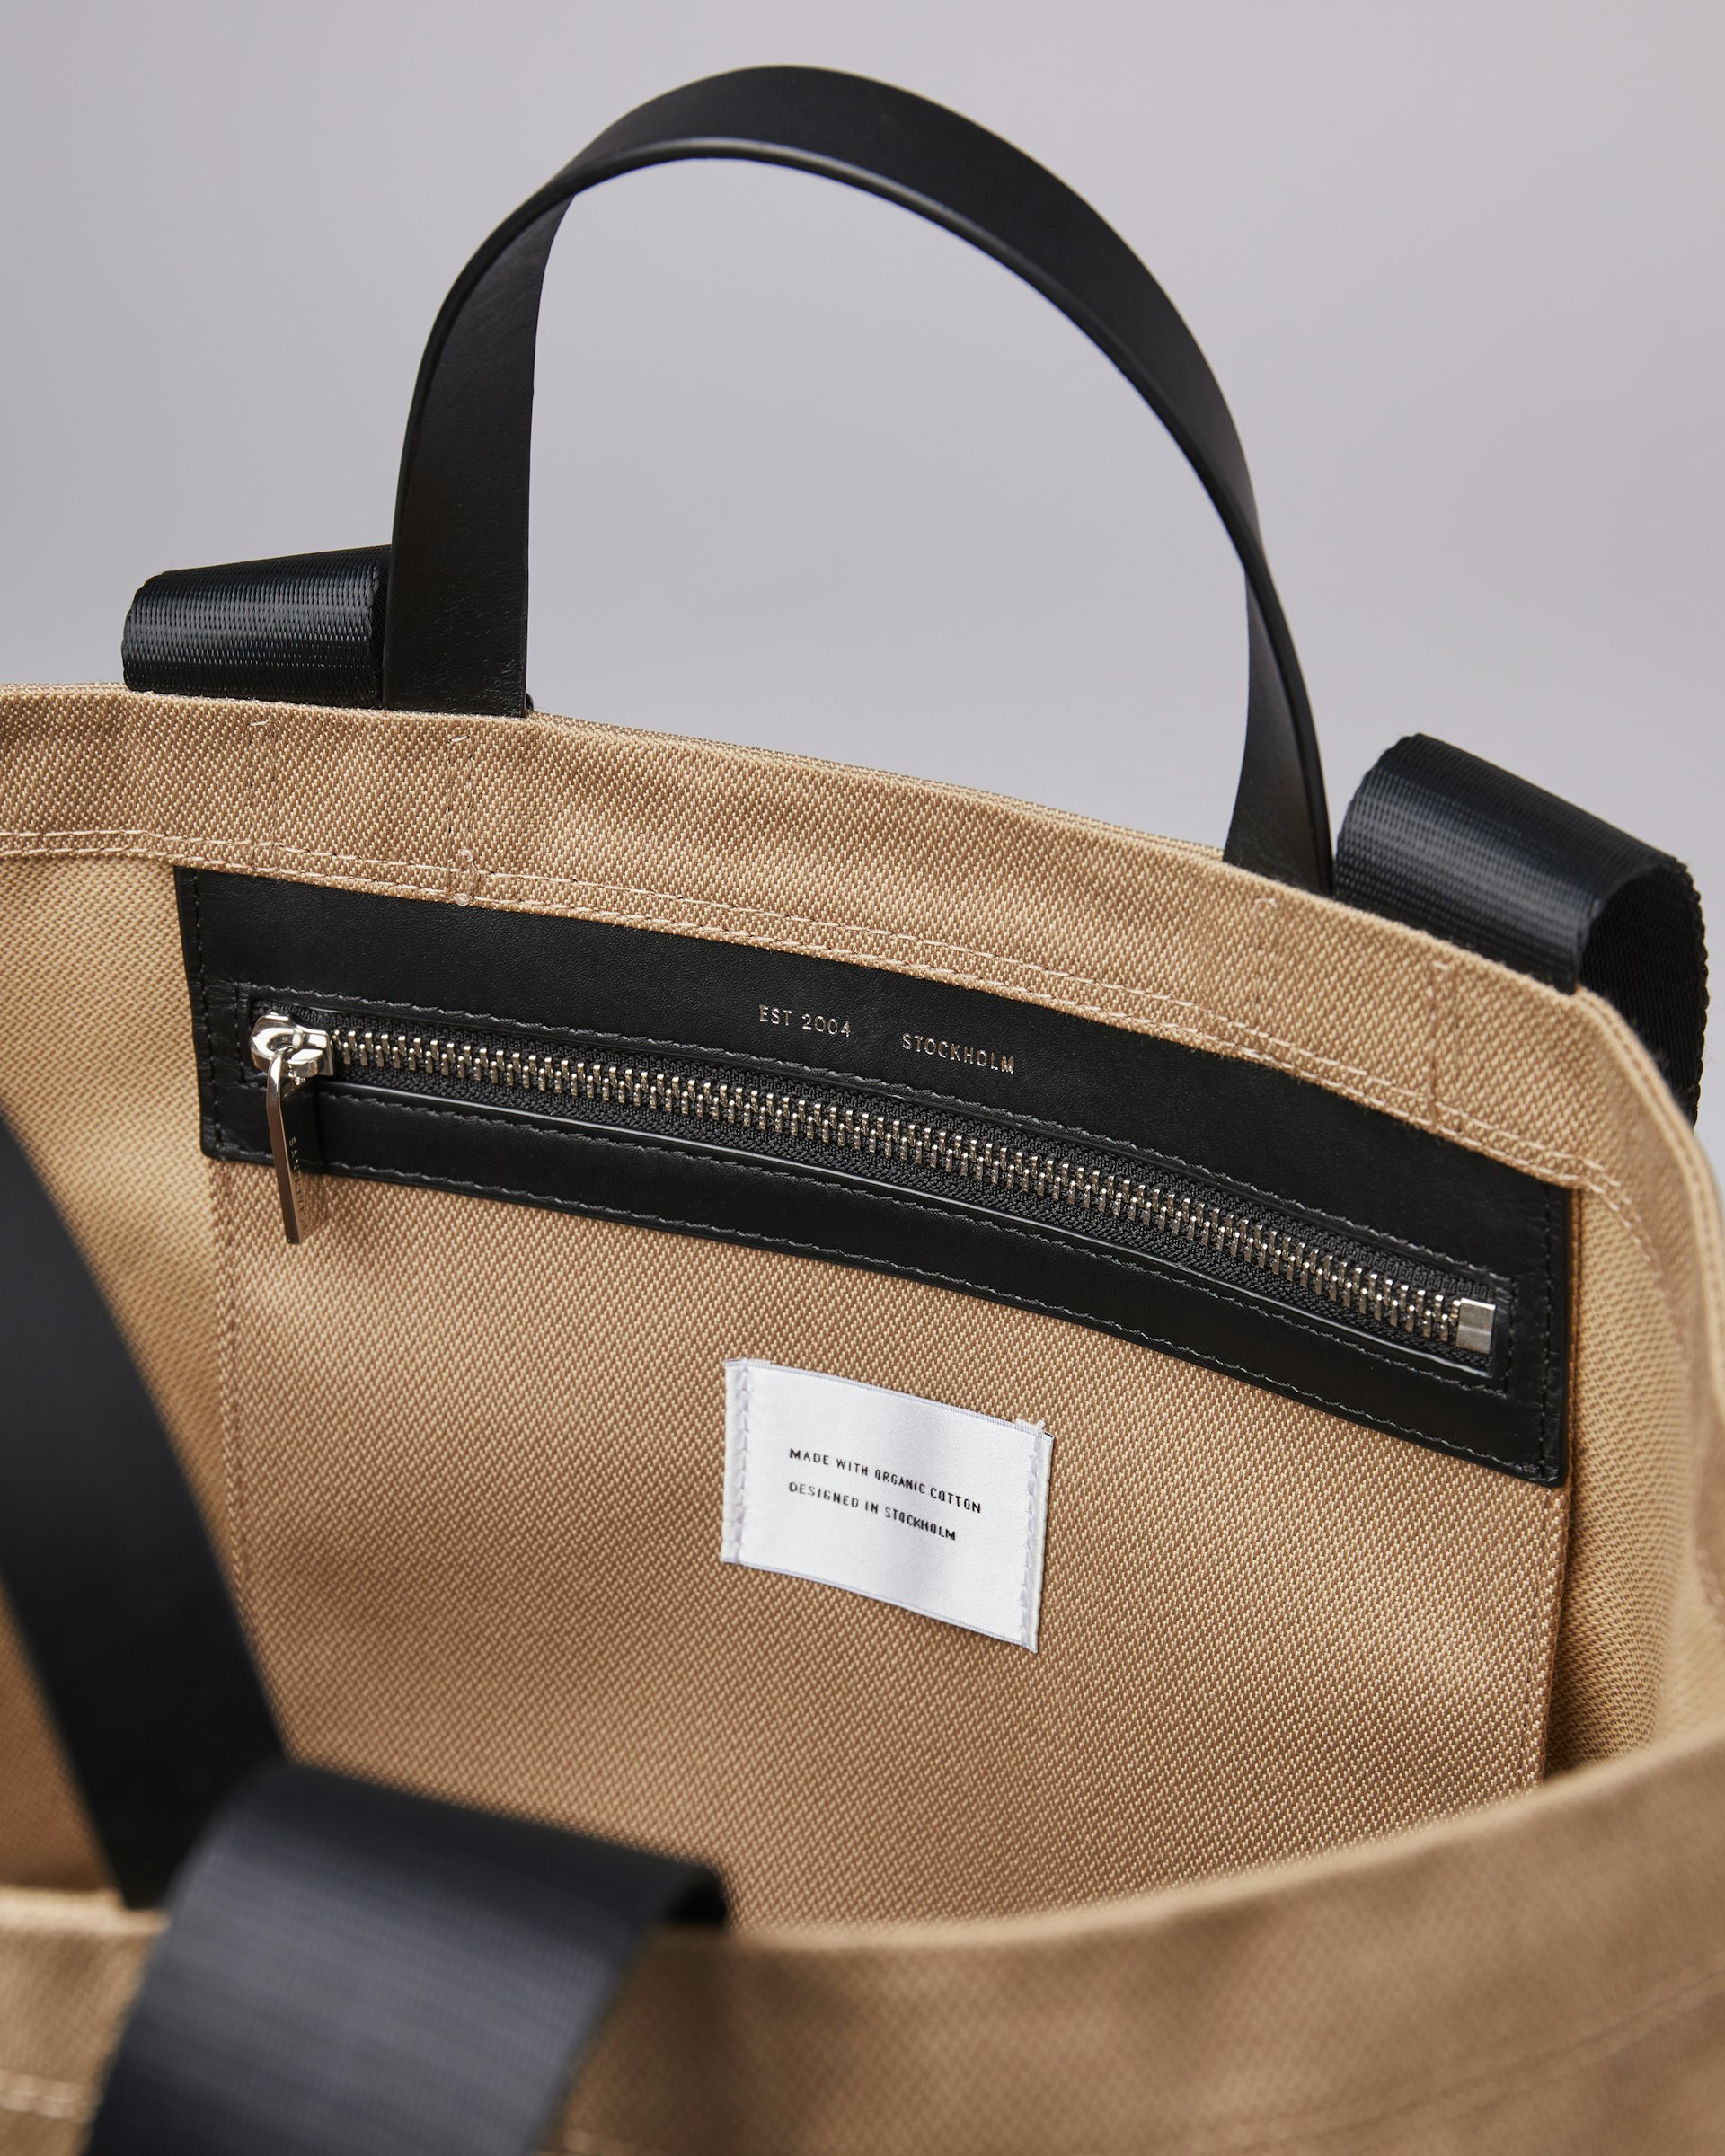 Agnes belongs to the category Tote bags and is in color black & beige (6 of 7)